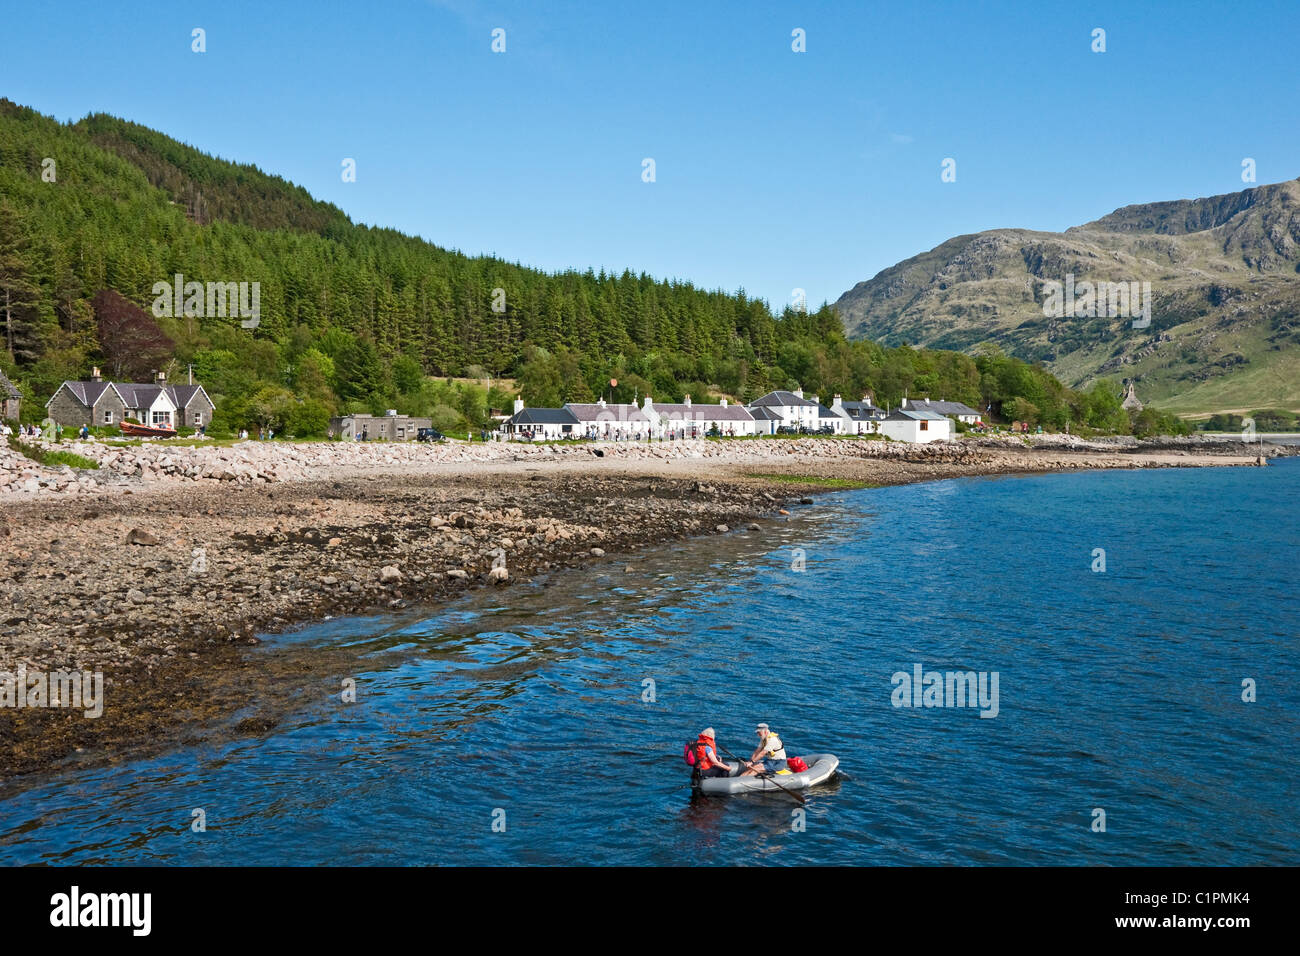 The small settlement of Inverie in Knoydart Highland of Scotland seen from Loch Nevis Stock Photo